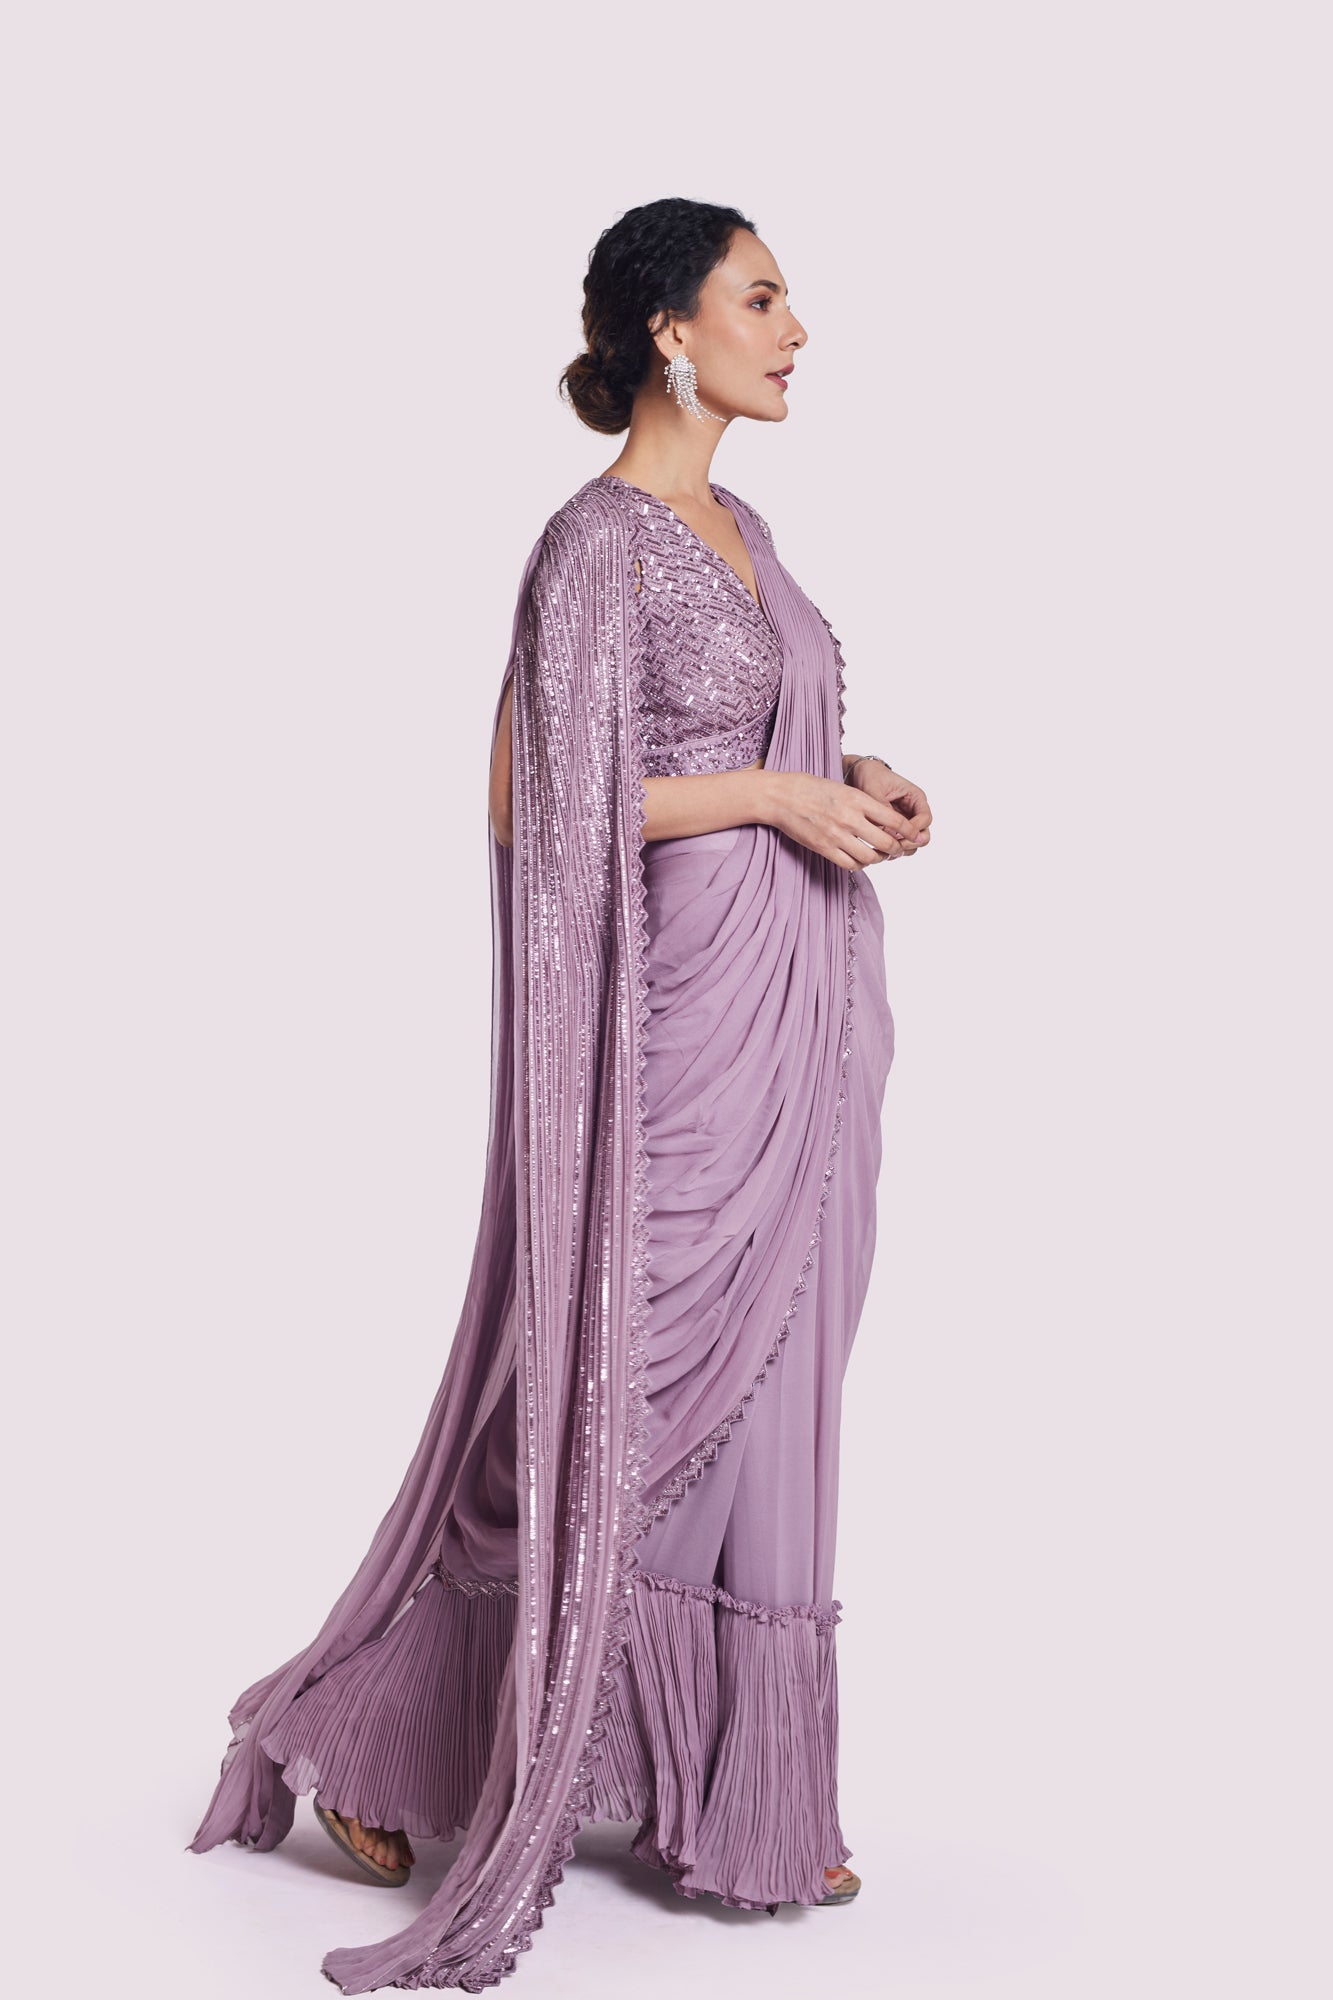 Buy mauve georgette draped saree online in USA with longline cape. Look your best at parties and weddings in beautiful designer sarees, embroidered sarees, handwoven sarees, silk sarees, organza saris from Pure Elegance Indian saree store in USA.-side